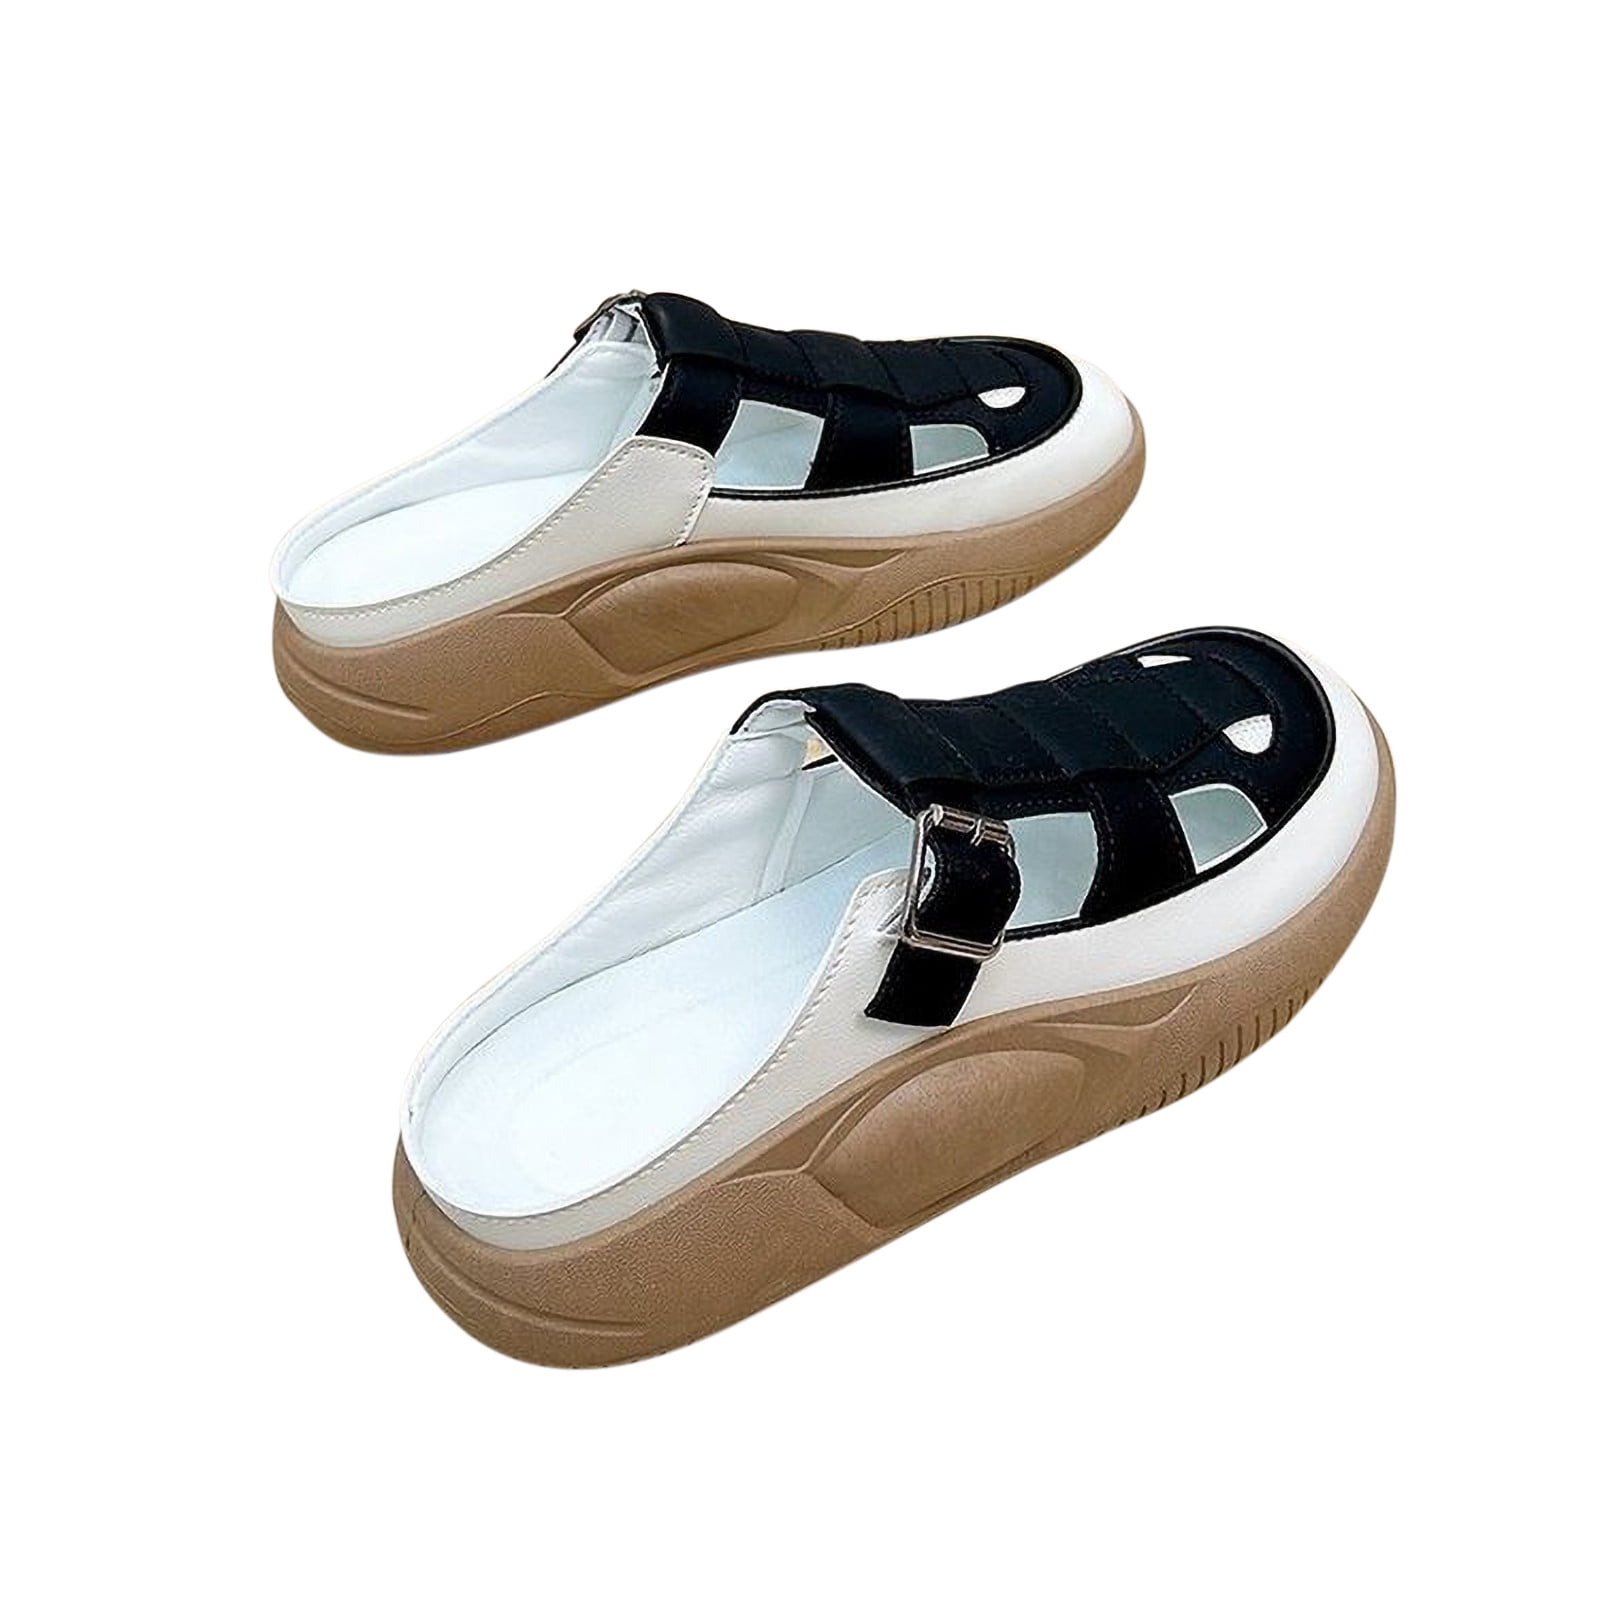 Lovskoo 2024 Clogs for Women Comfortable Summer Mules with Cushion Footbed  Close Toe Hallow Out Slip On Shoes Walking Sandals Black 